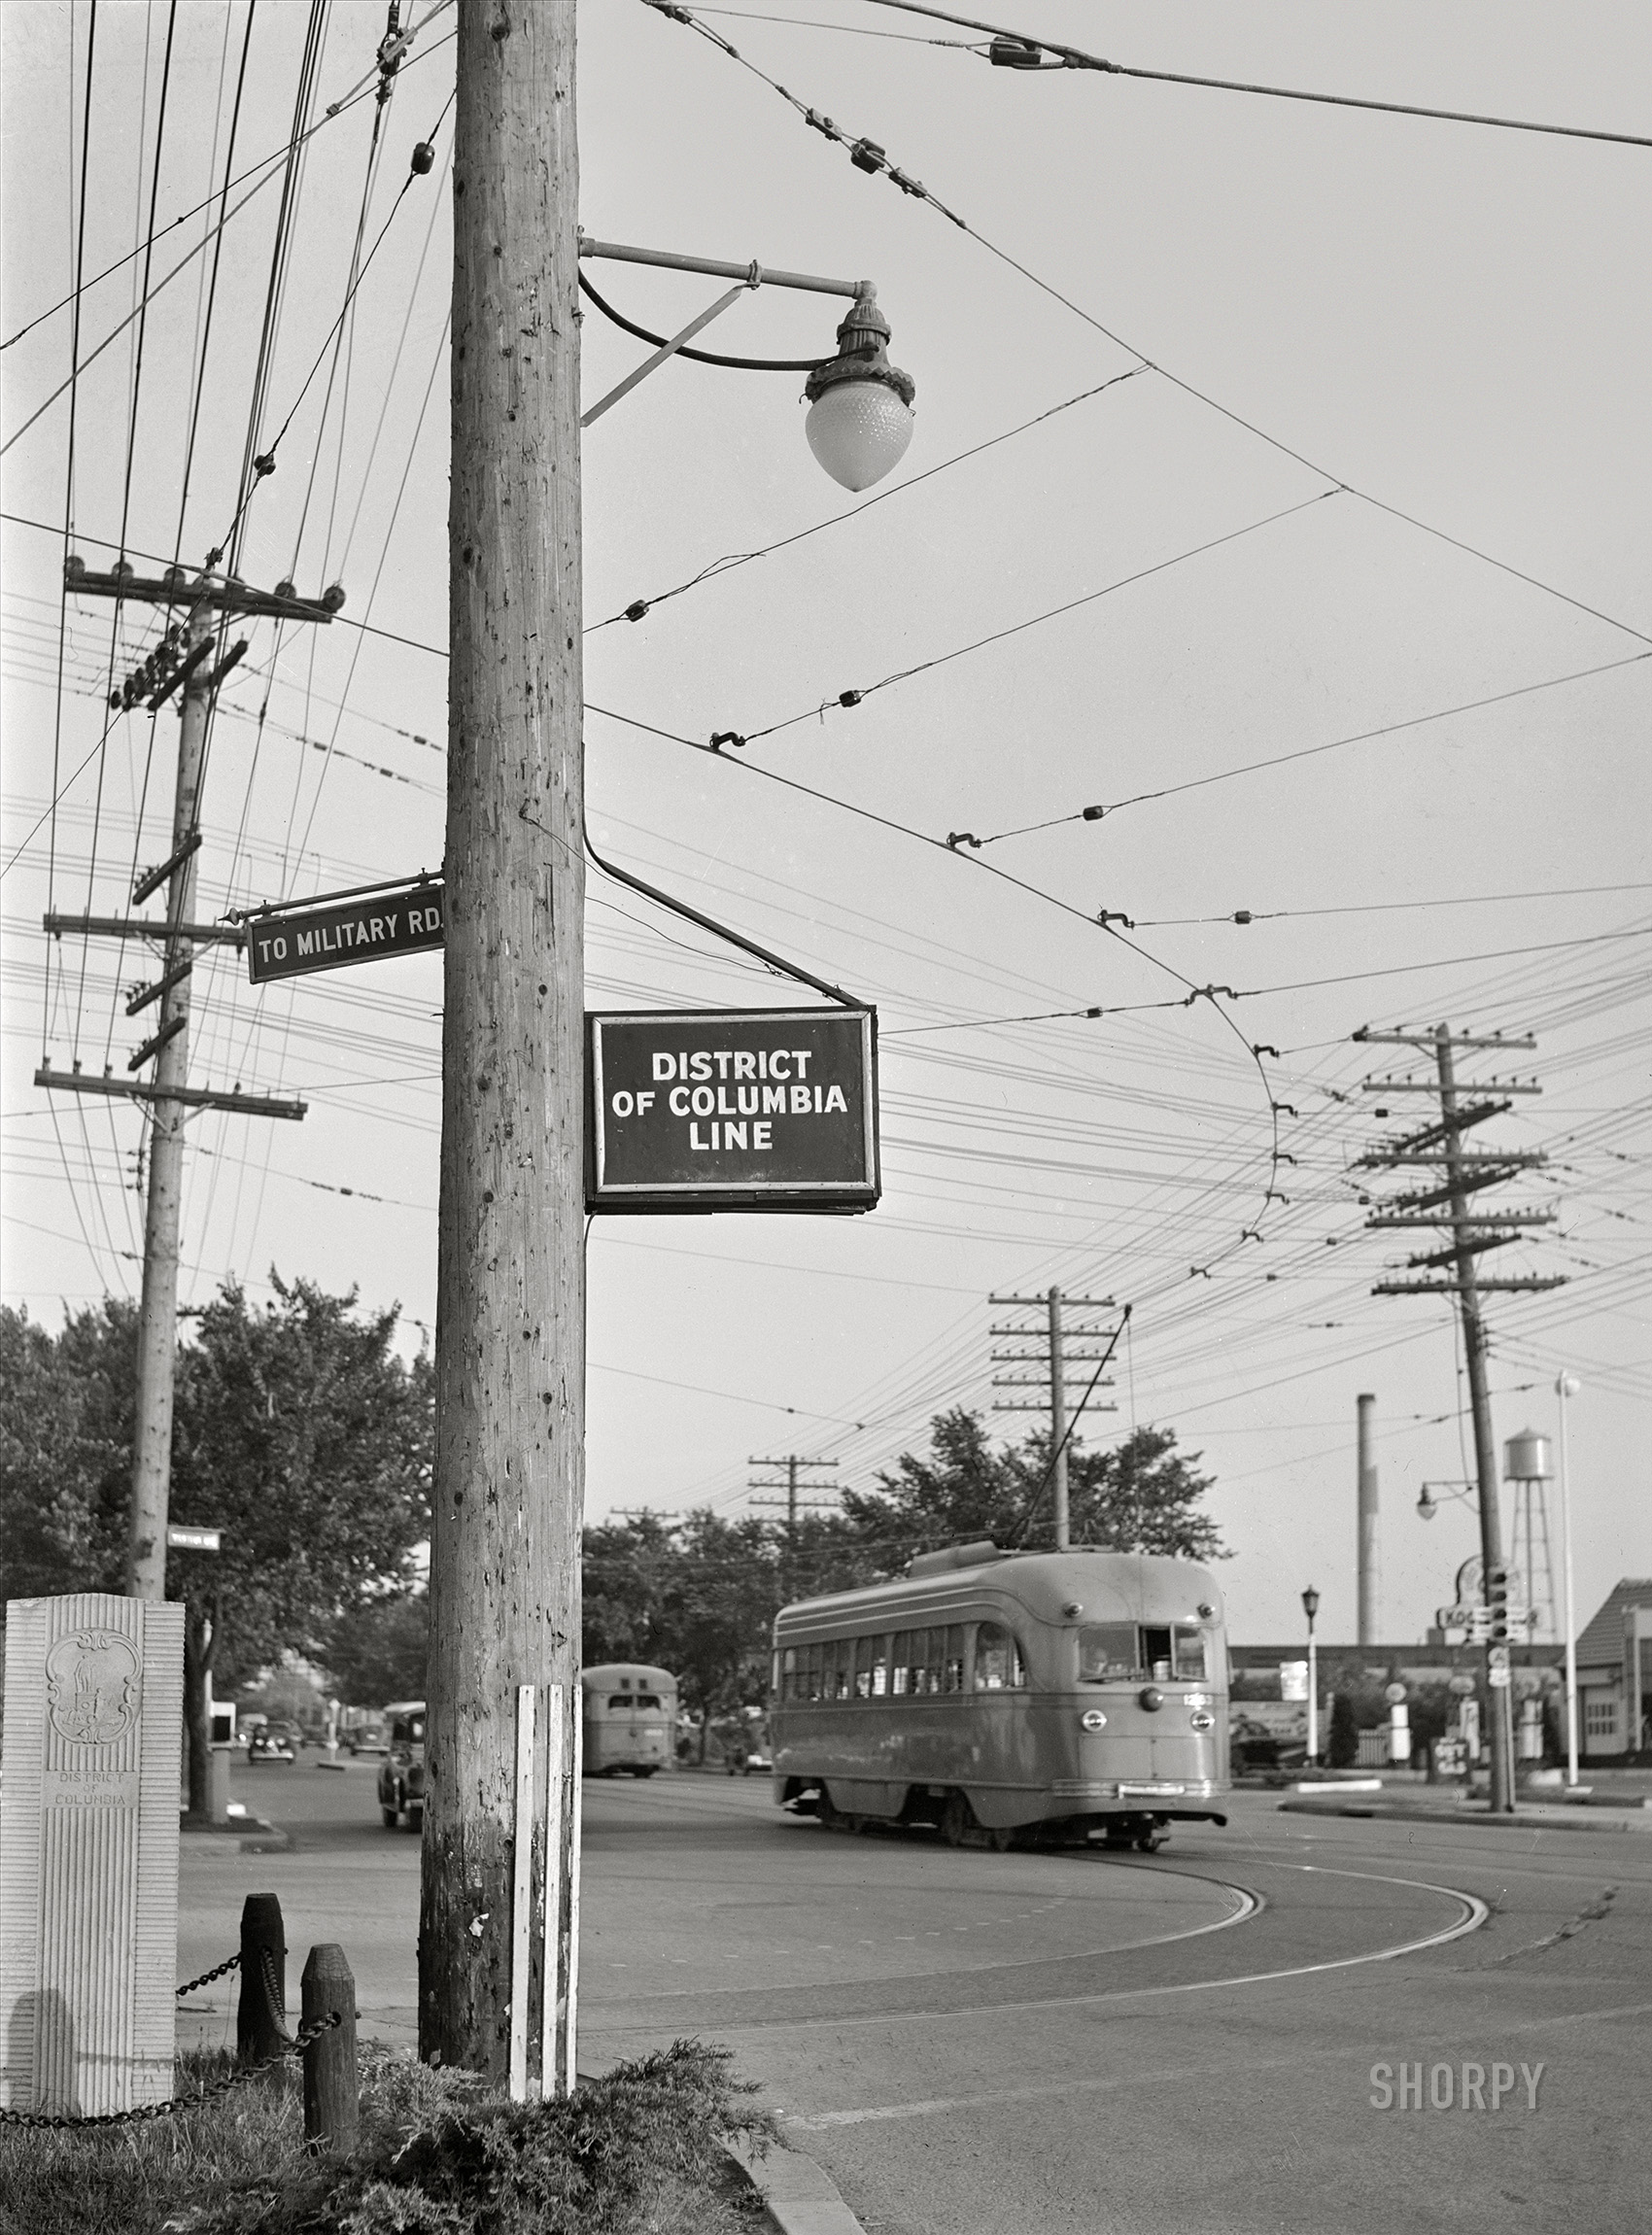 June-July 1942. "District of Columbia and Maryland boundary line at Wisconsin Avenue in the evening." Acetate negative by Marjory Collins for the Office of War Information. View full size.